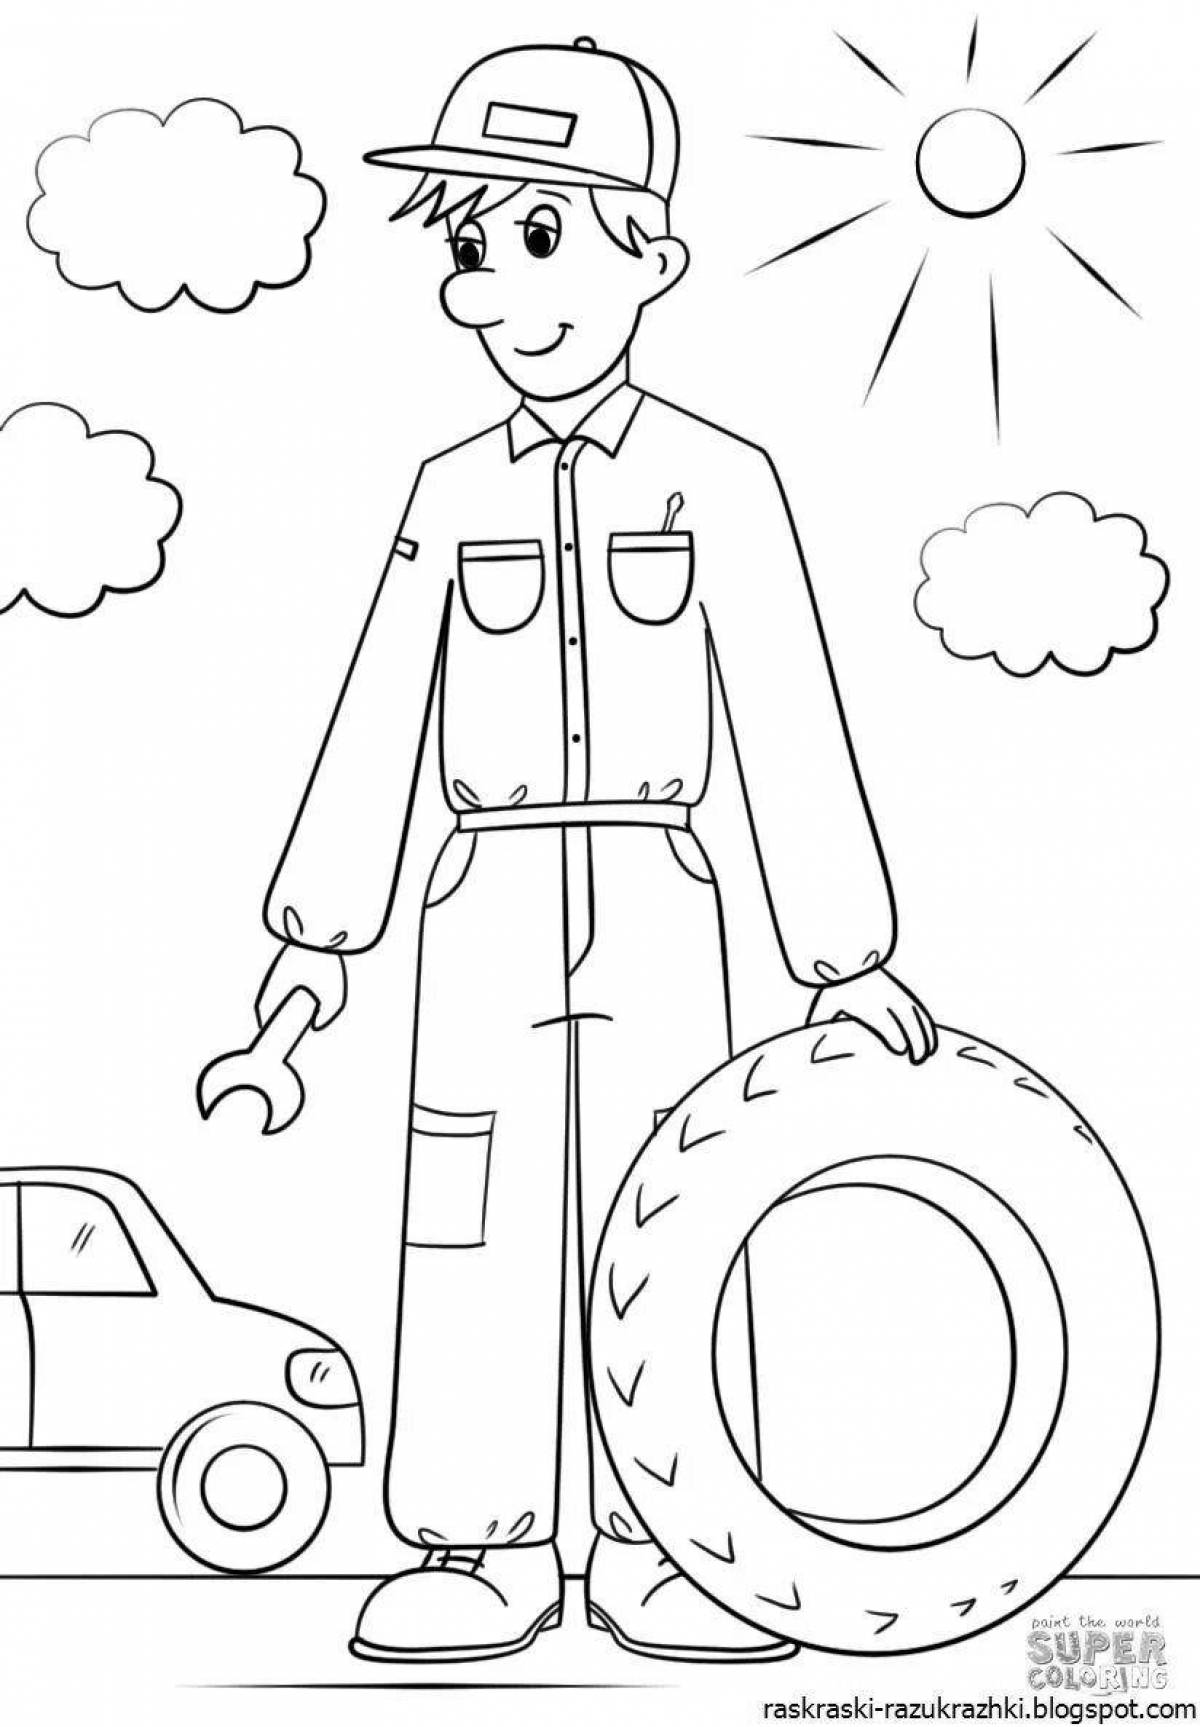 Living car mechanic coloring book for kids